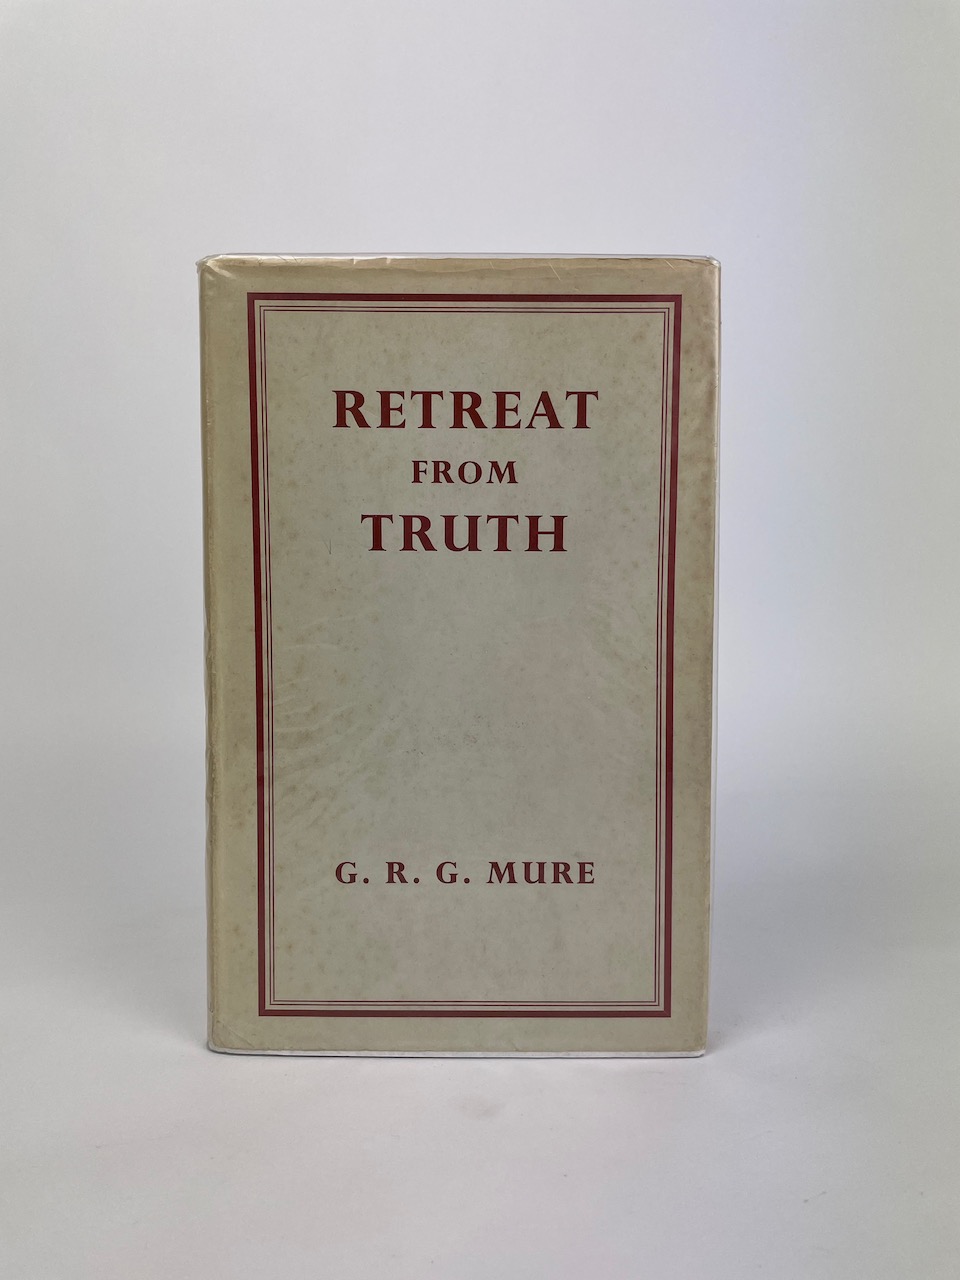 Retreat From Truth signed by Tolkien “Given by G.R.G.M. 1966 JRRT” on the flyleaf